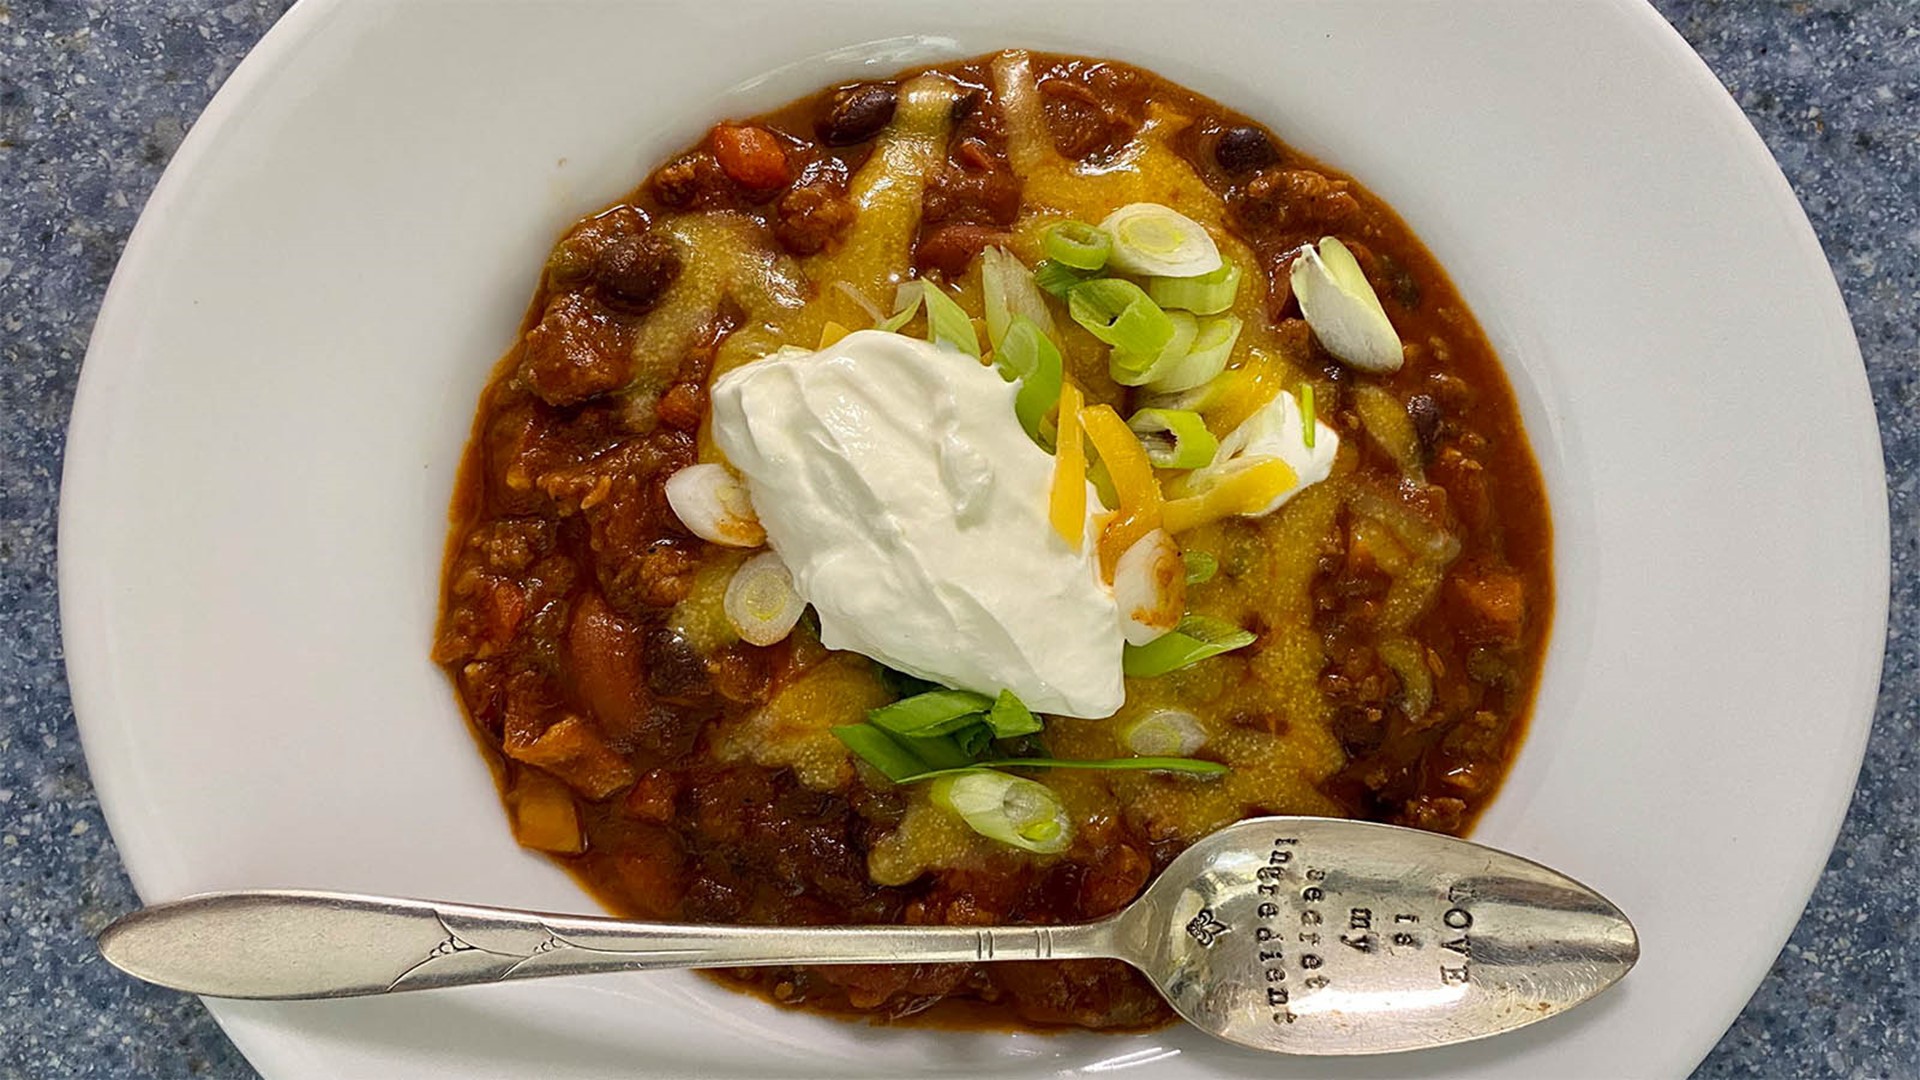 In honor of National IPA Beer Day, Chef Kevin Belton made Beer Chili.